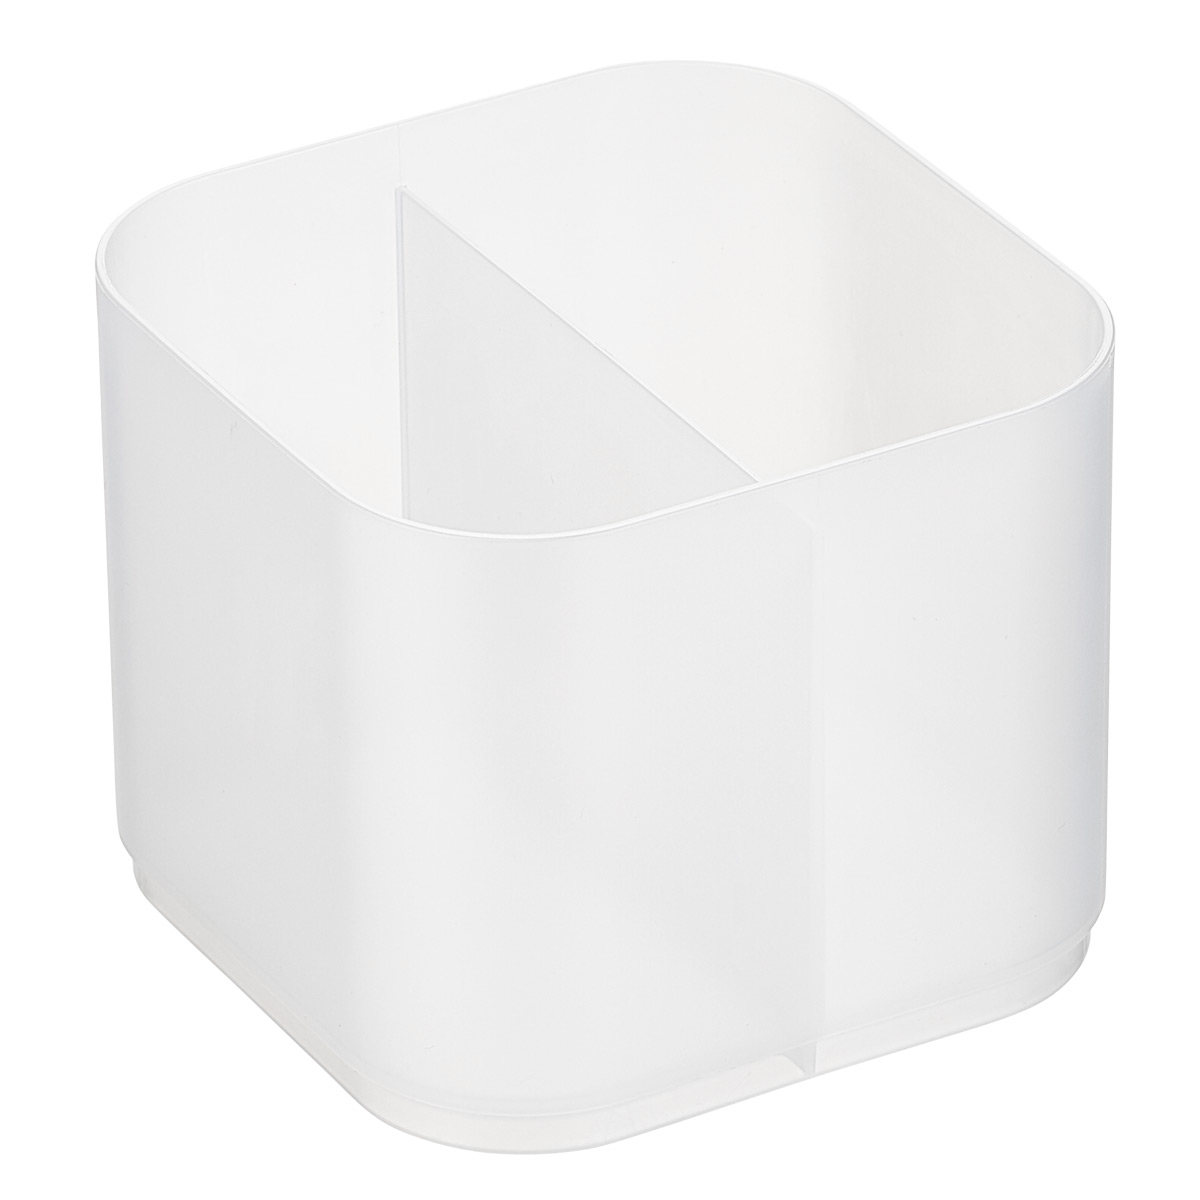 Shimo Divided Inserts | The Container Store